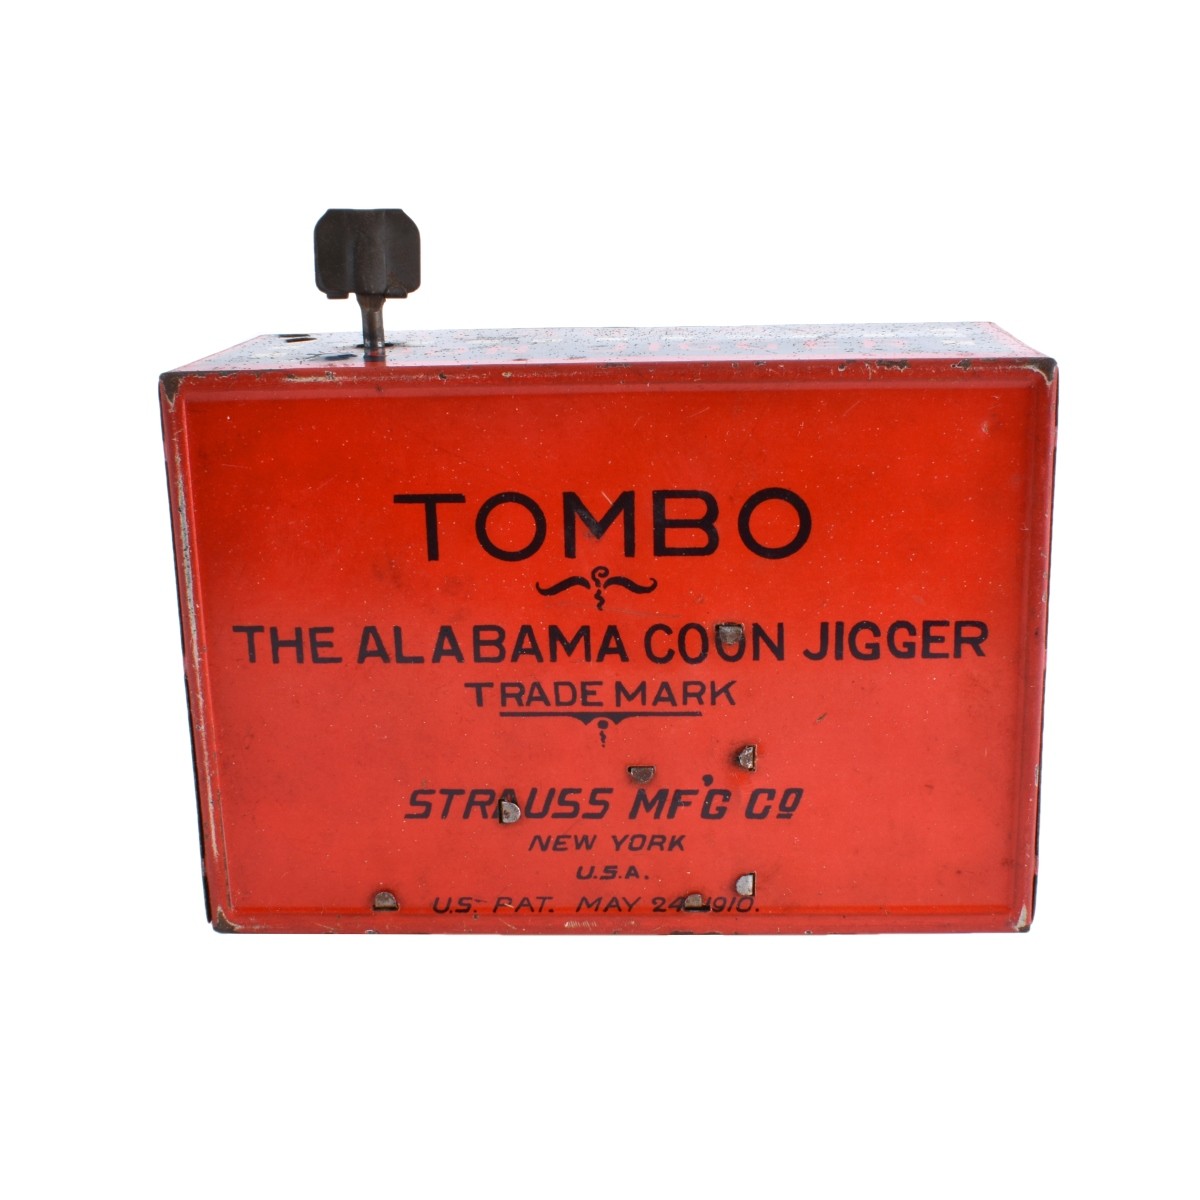 Strauss Manufacturing Co., "Tombo" Coon Jigger